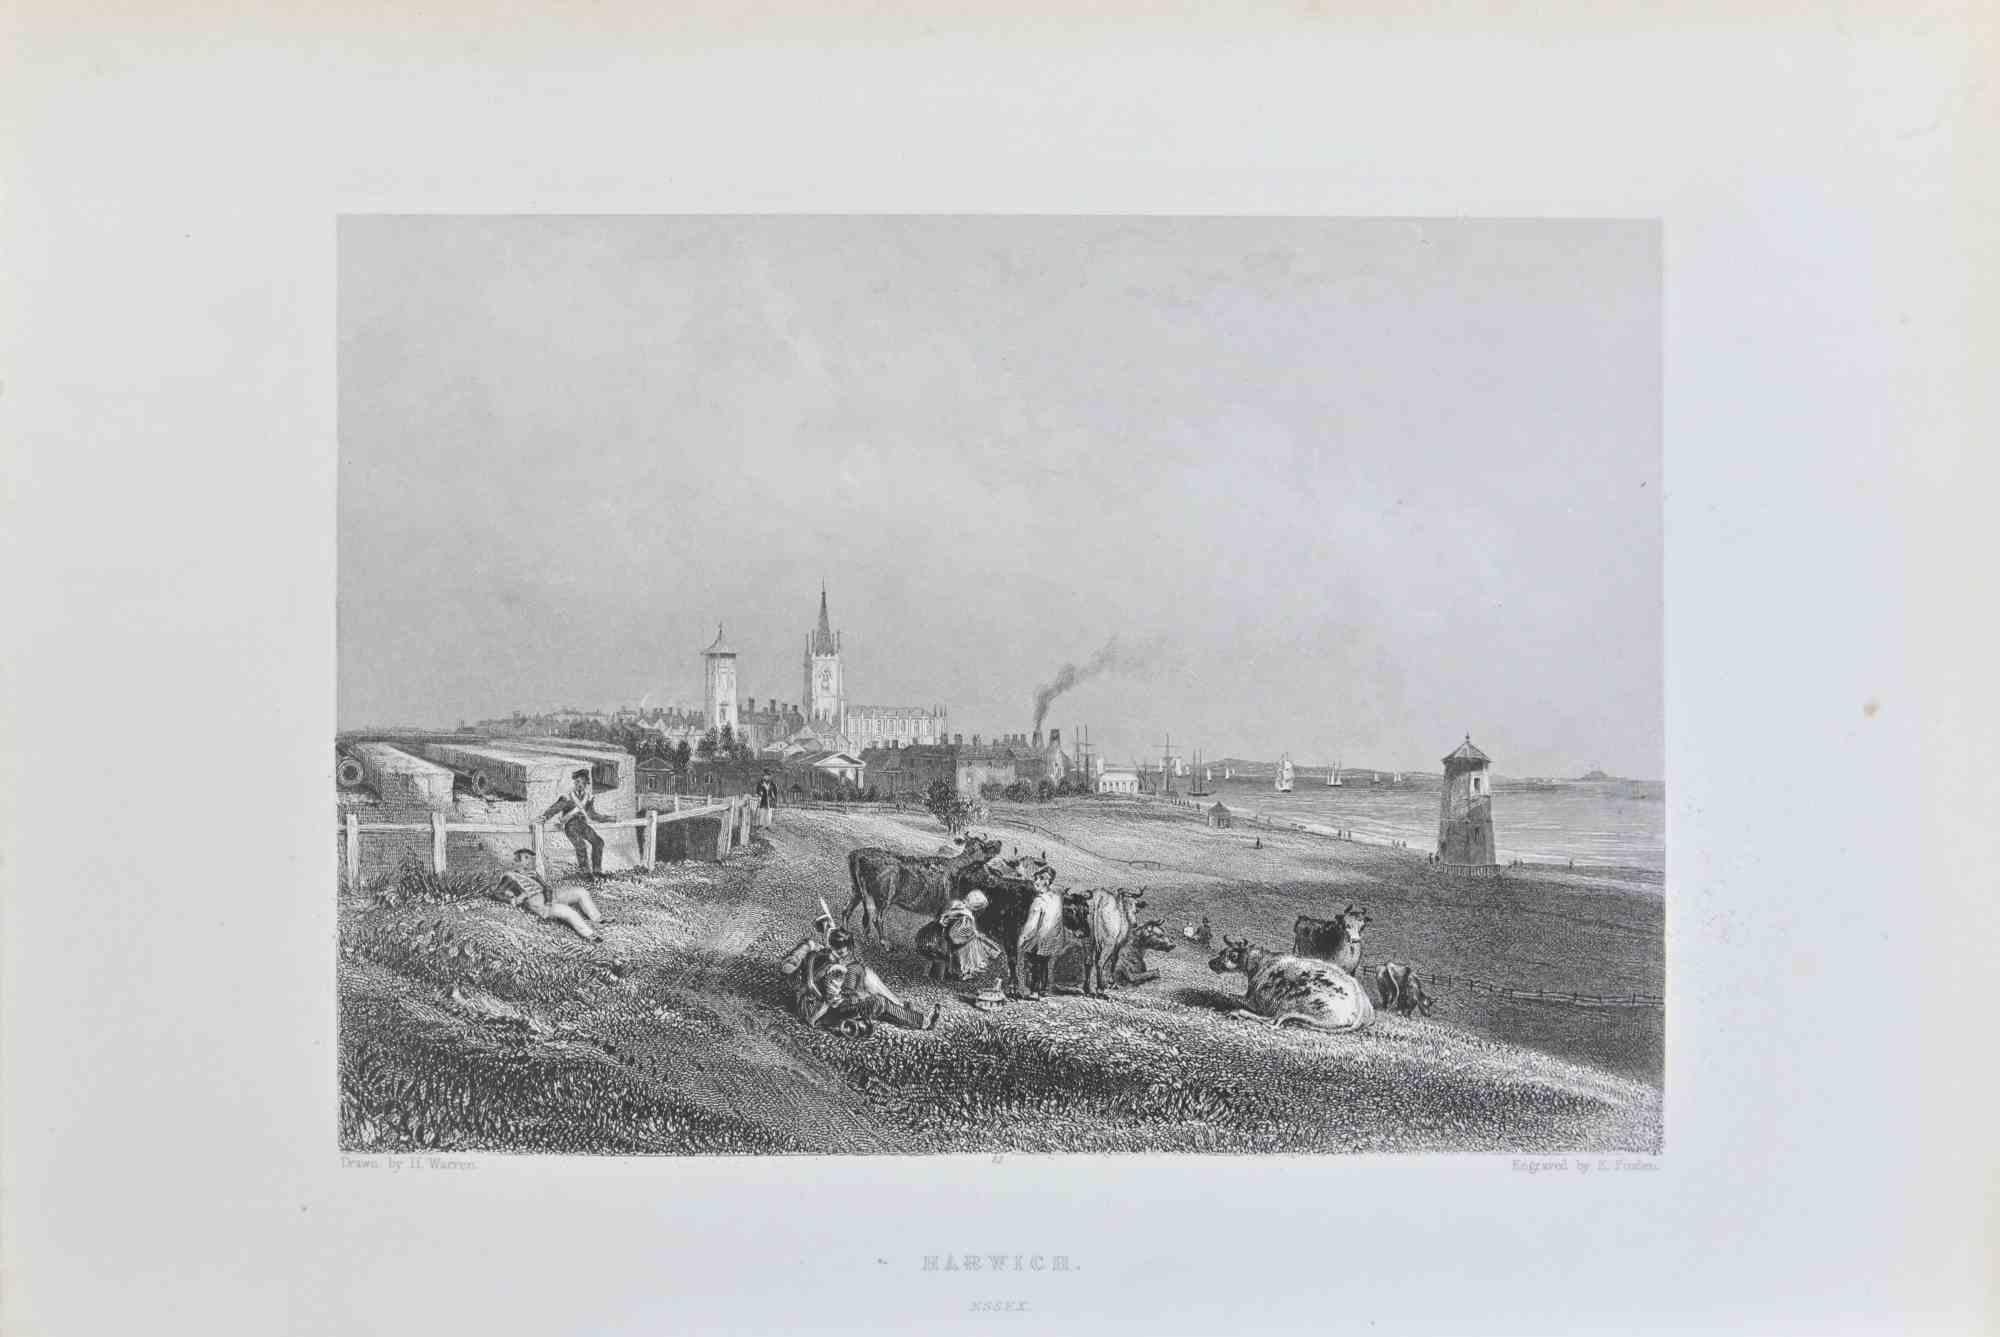 Harwich is an  engraving on paper realized by E. Finden in 1838.

The artwork is in good condition.

The artwork is depicted in a well-balanced composition.
